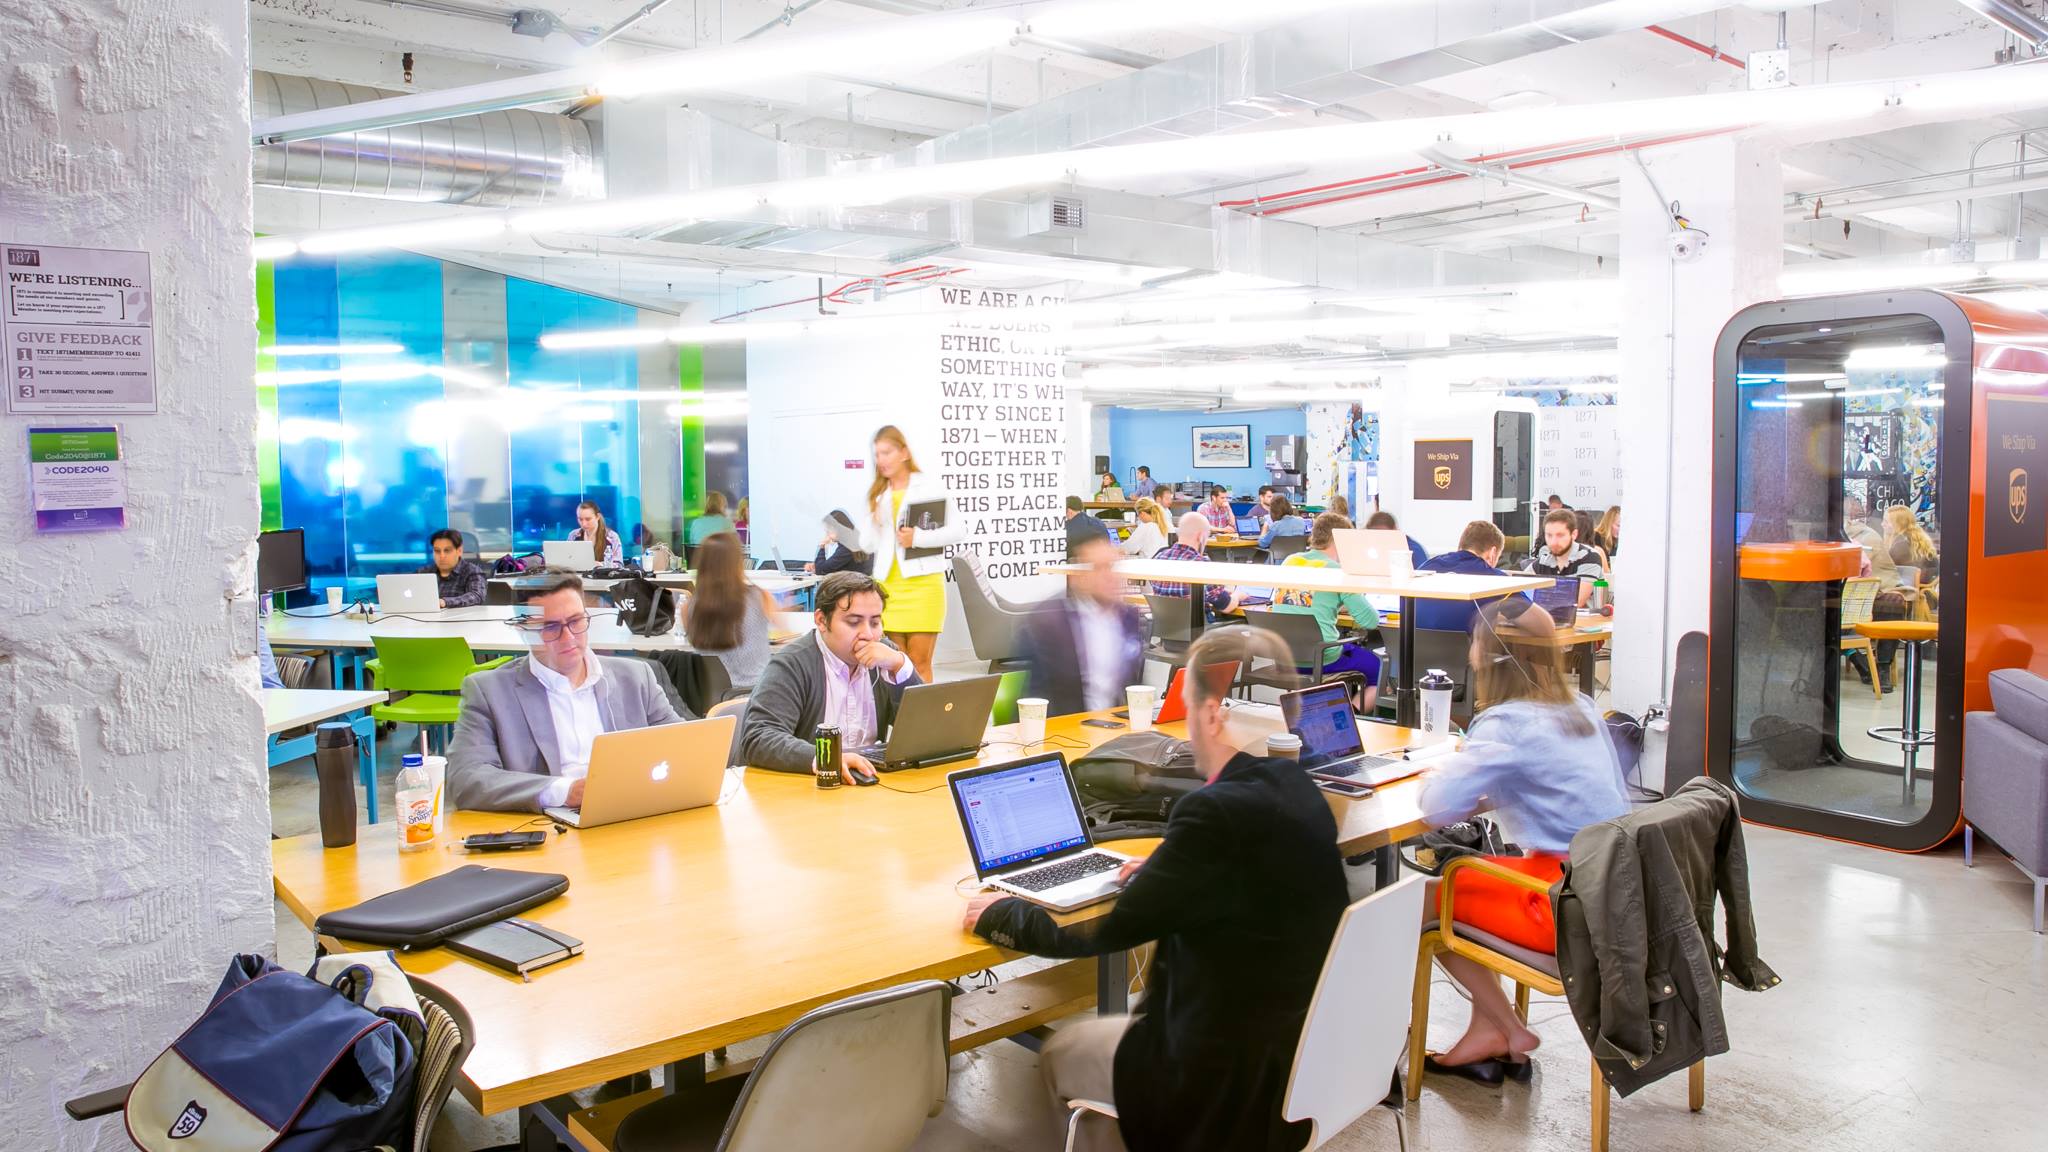 Chicago's 1871 Acquires ITA to grow city's tech industry